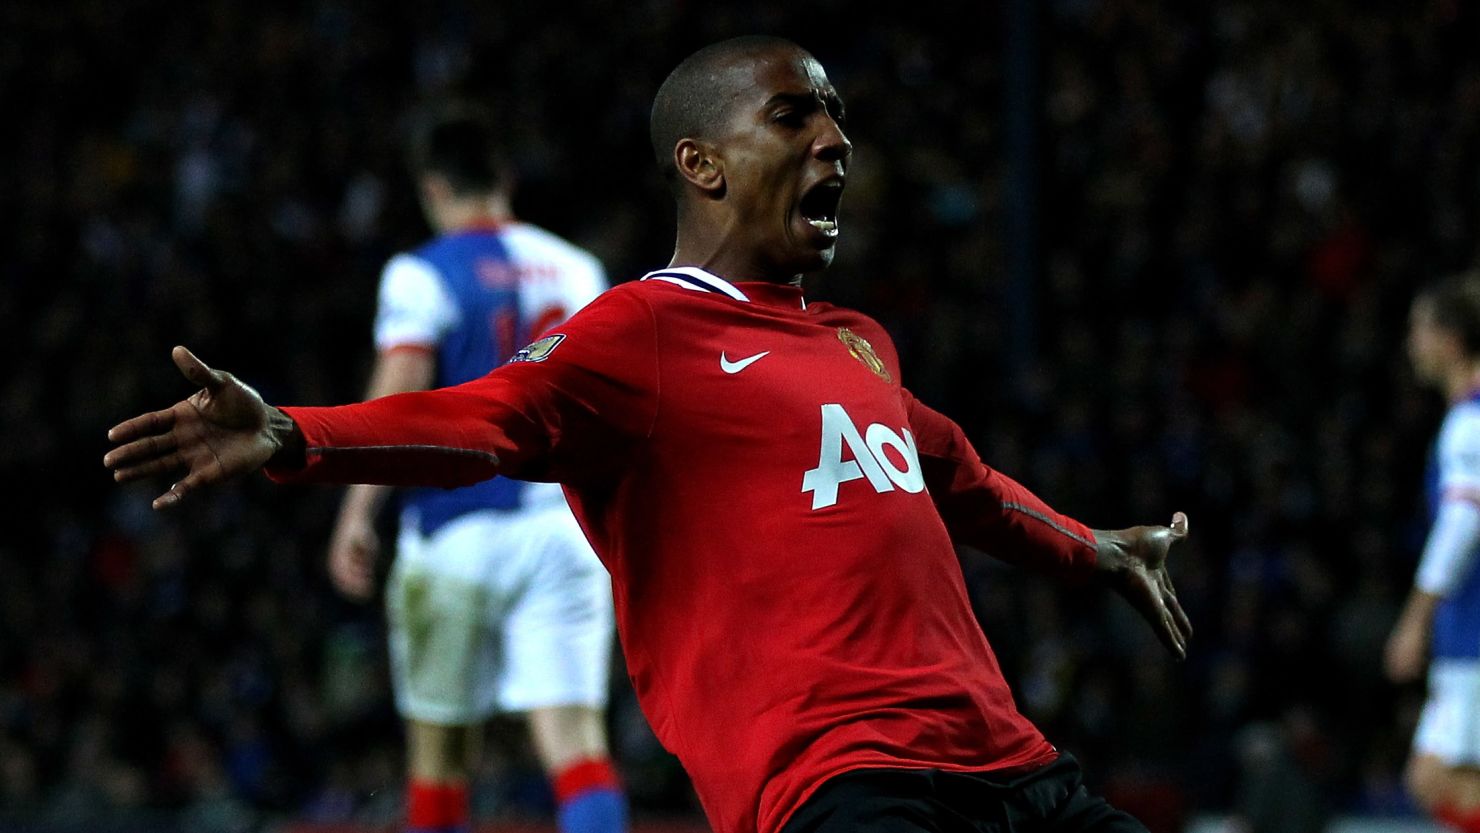 Ashley Young scored Manchester United's second goal in a 2-0 win against Blackburn Rovers on Monday